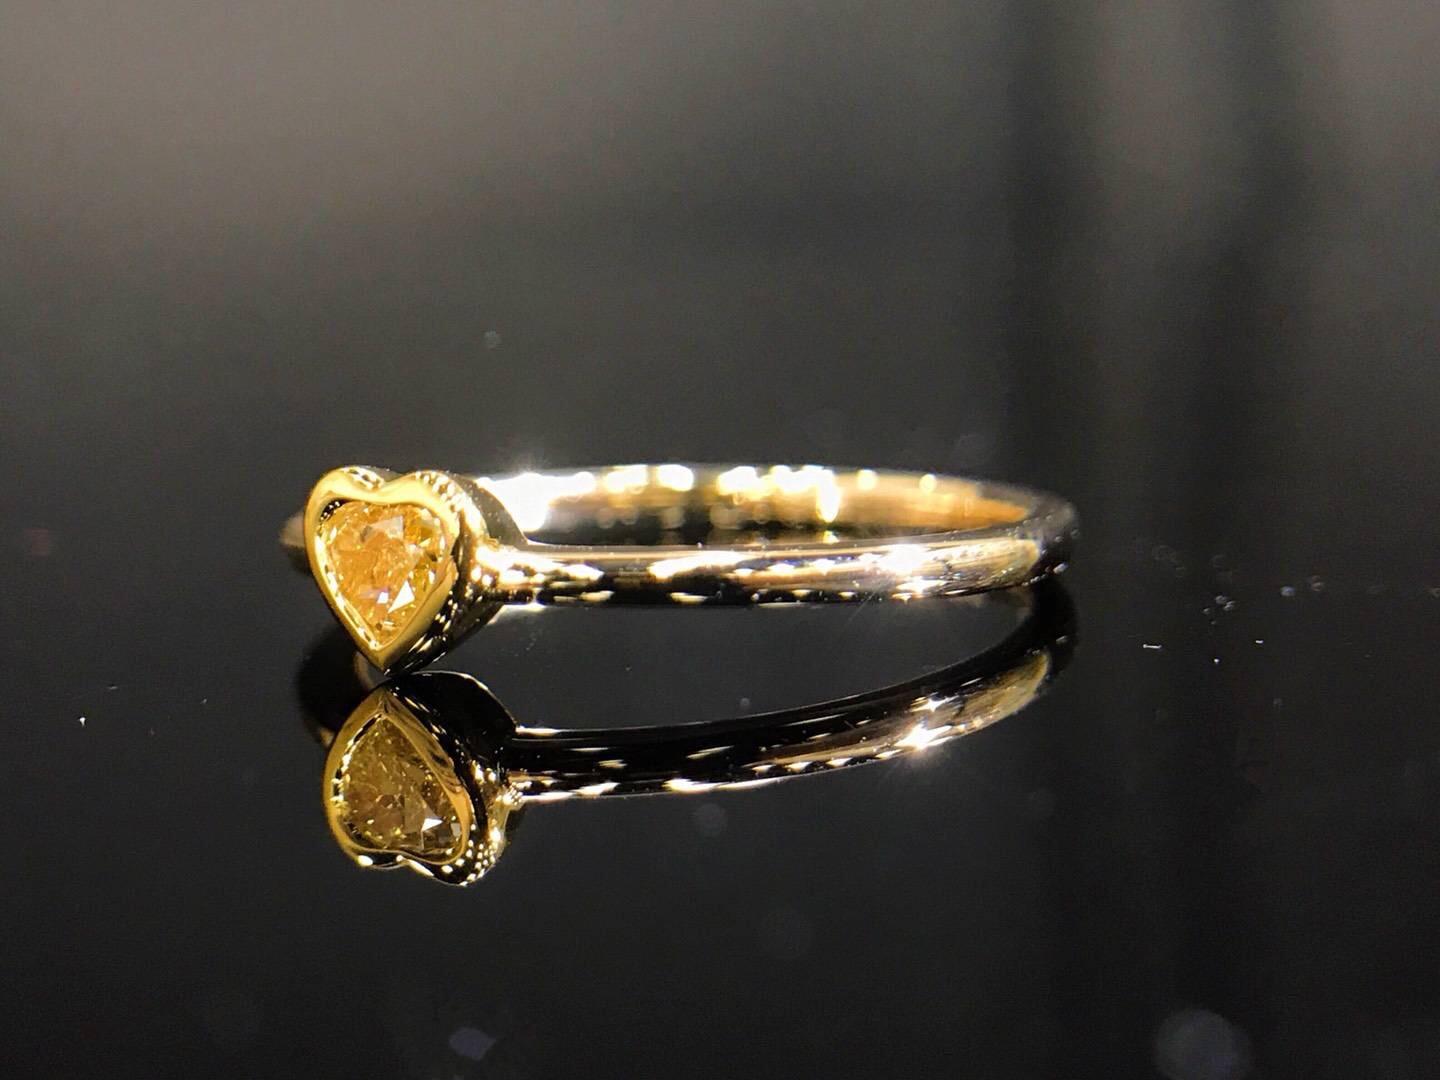 P00825 Heart Shaped Yellow Diamond Ring in 18k Gold